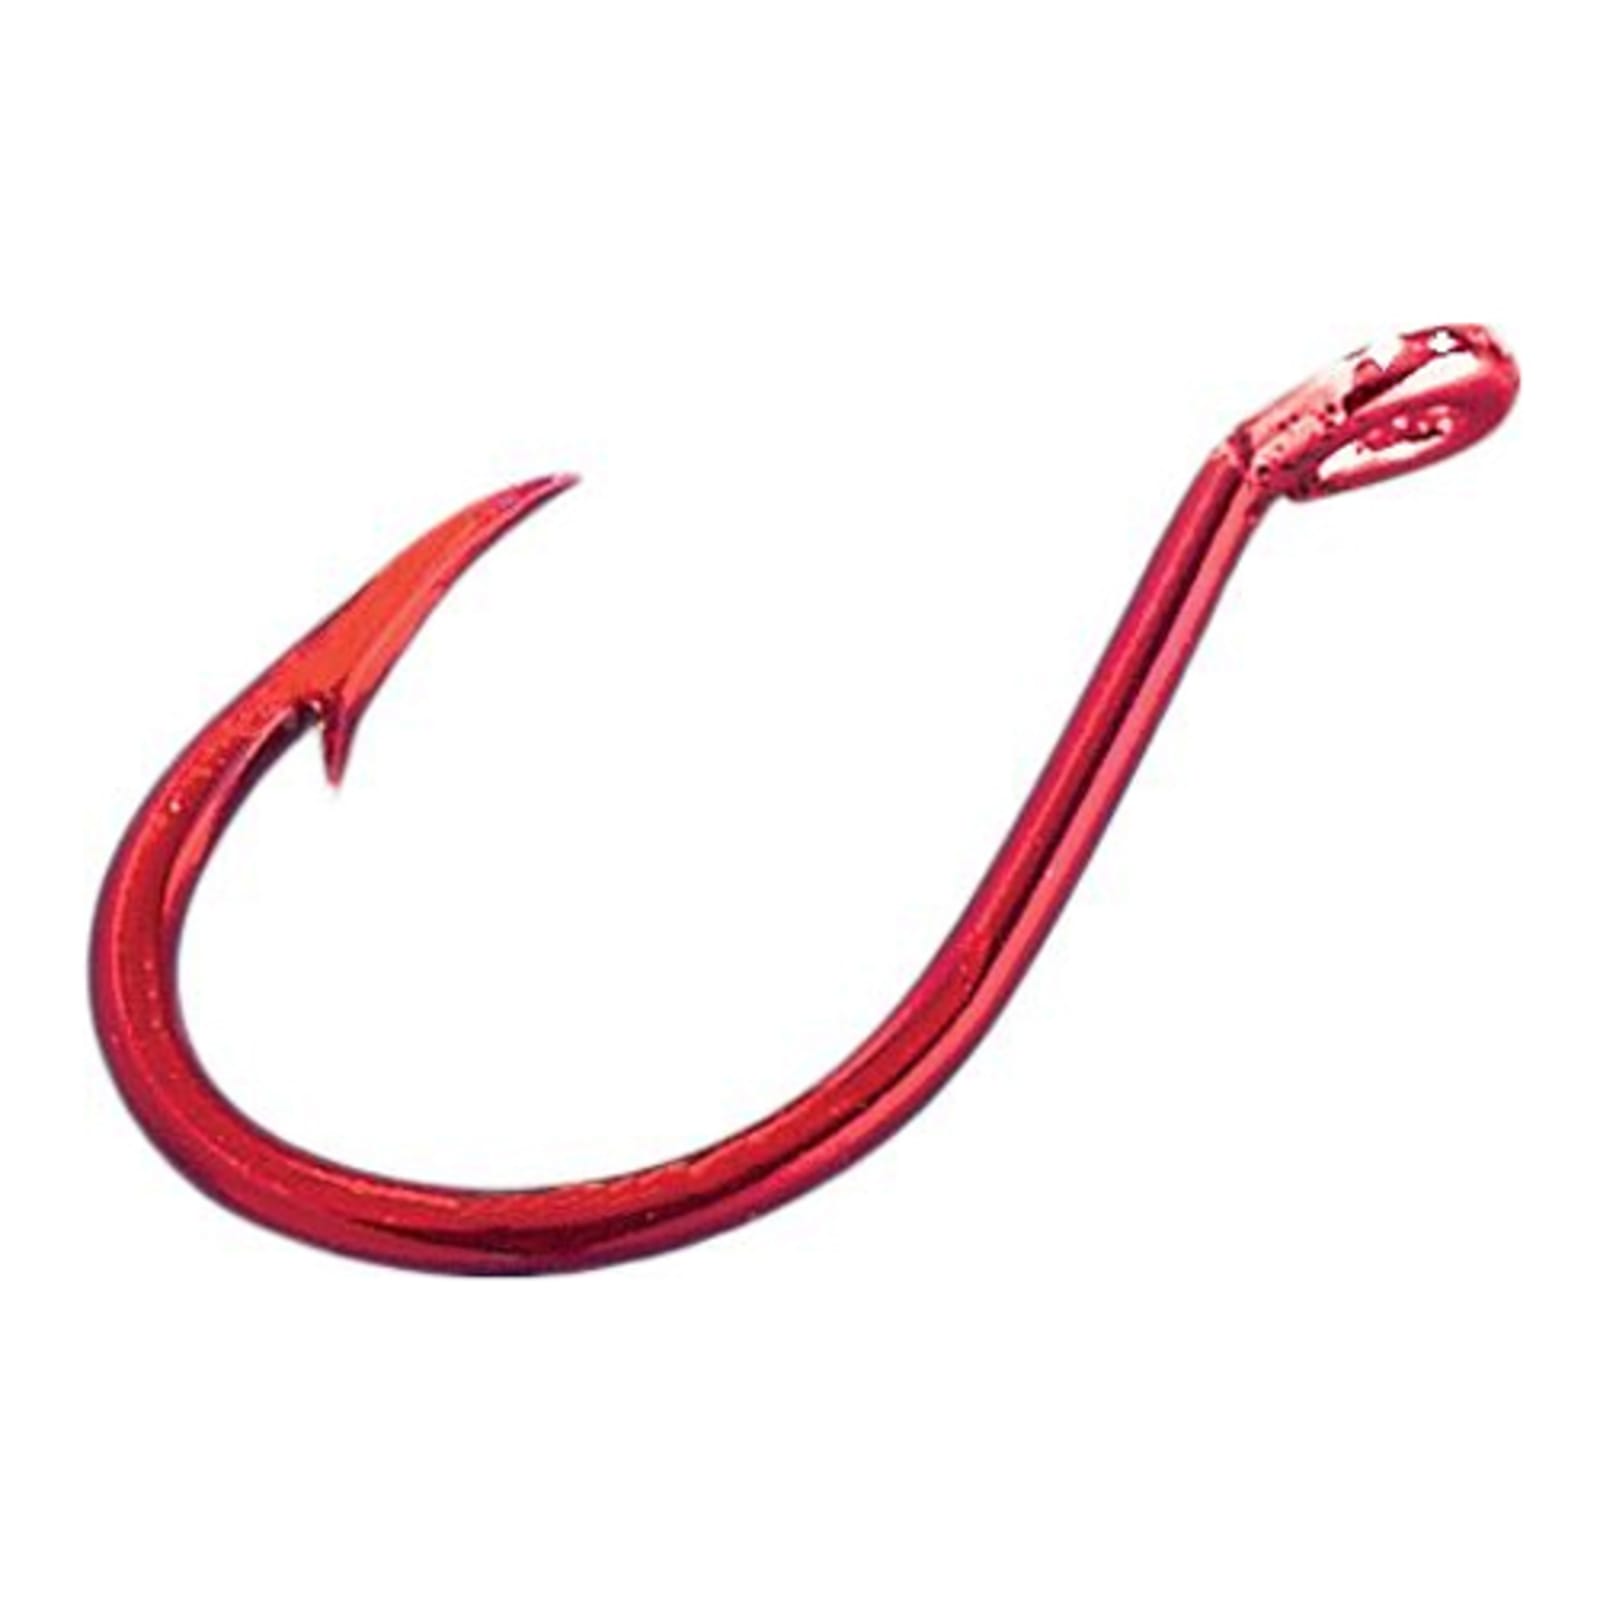 Lazer Sharp Octopus Hook in Red Size 2